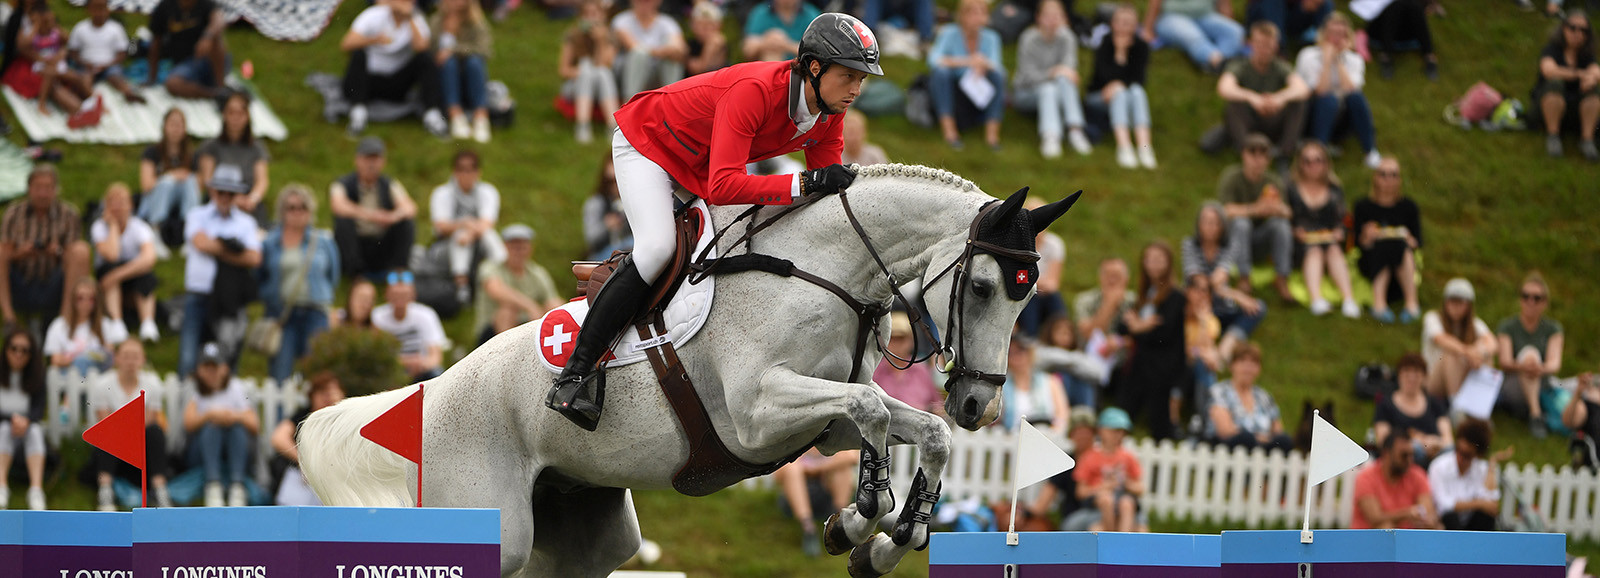 Longines FEI Jumping Nations Cup™ 2022 St Gallen, Switzerland MARTIN FUCHS of Switzerland on LEONE JEI tackles the opening jump in the Longines FEI Jumping Nations Cup of Switzerland in St Gallen, Switzerland, June 6, 2022.